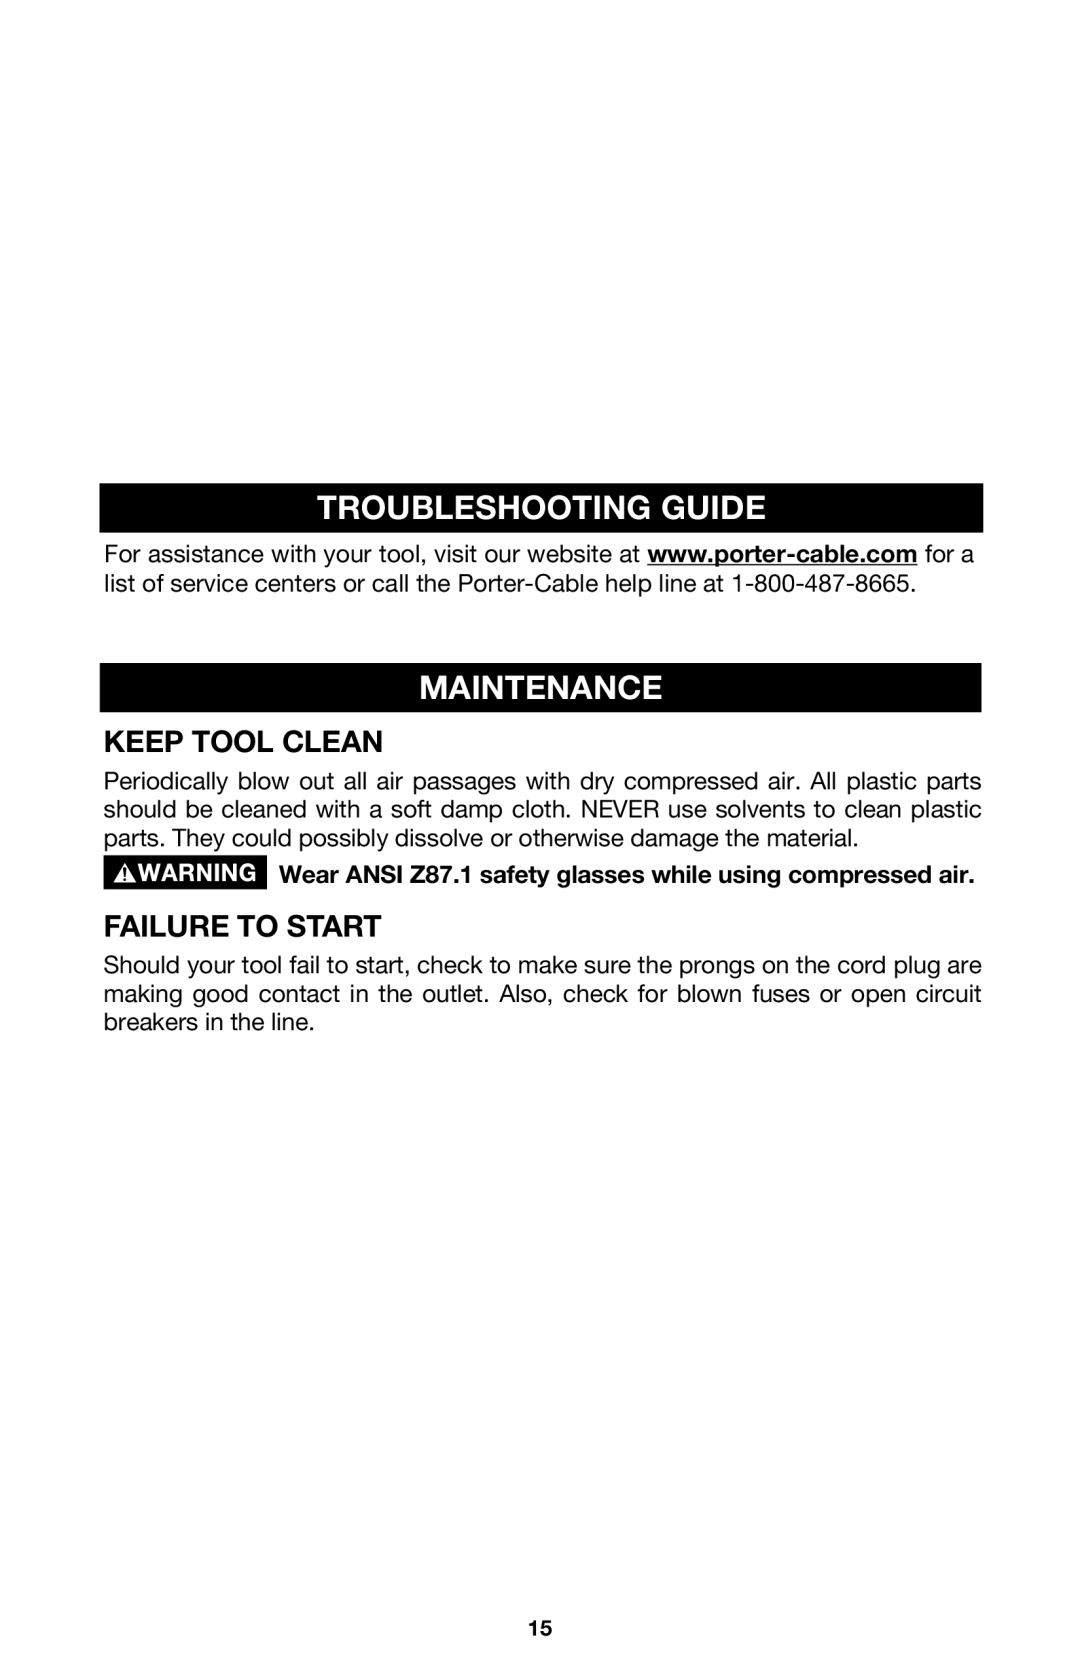 PYLE Audio 314 instruction manual Troubleshooting Guide, Maintenance, Keep Tool Clean, Failure To Start 